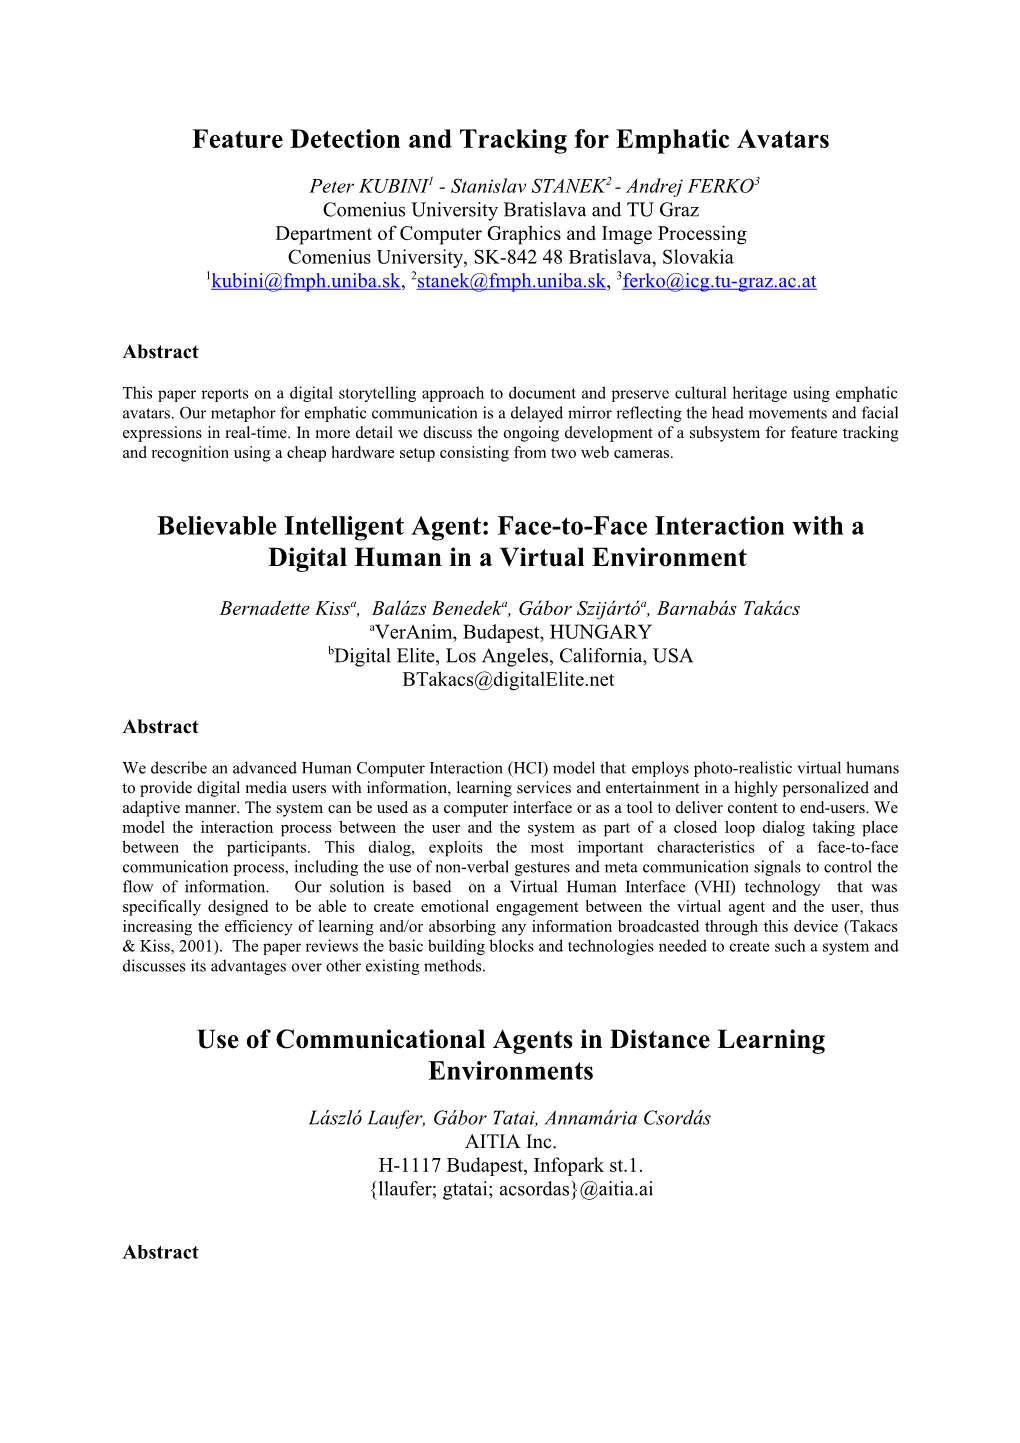 Virtual Reality and Its Applications in the Treatment of Post-Traumatic Stress Disorder